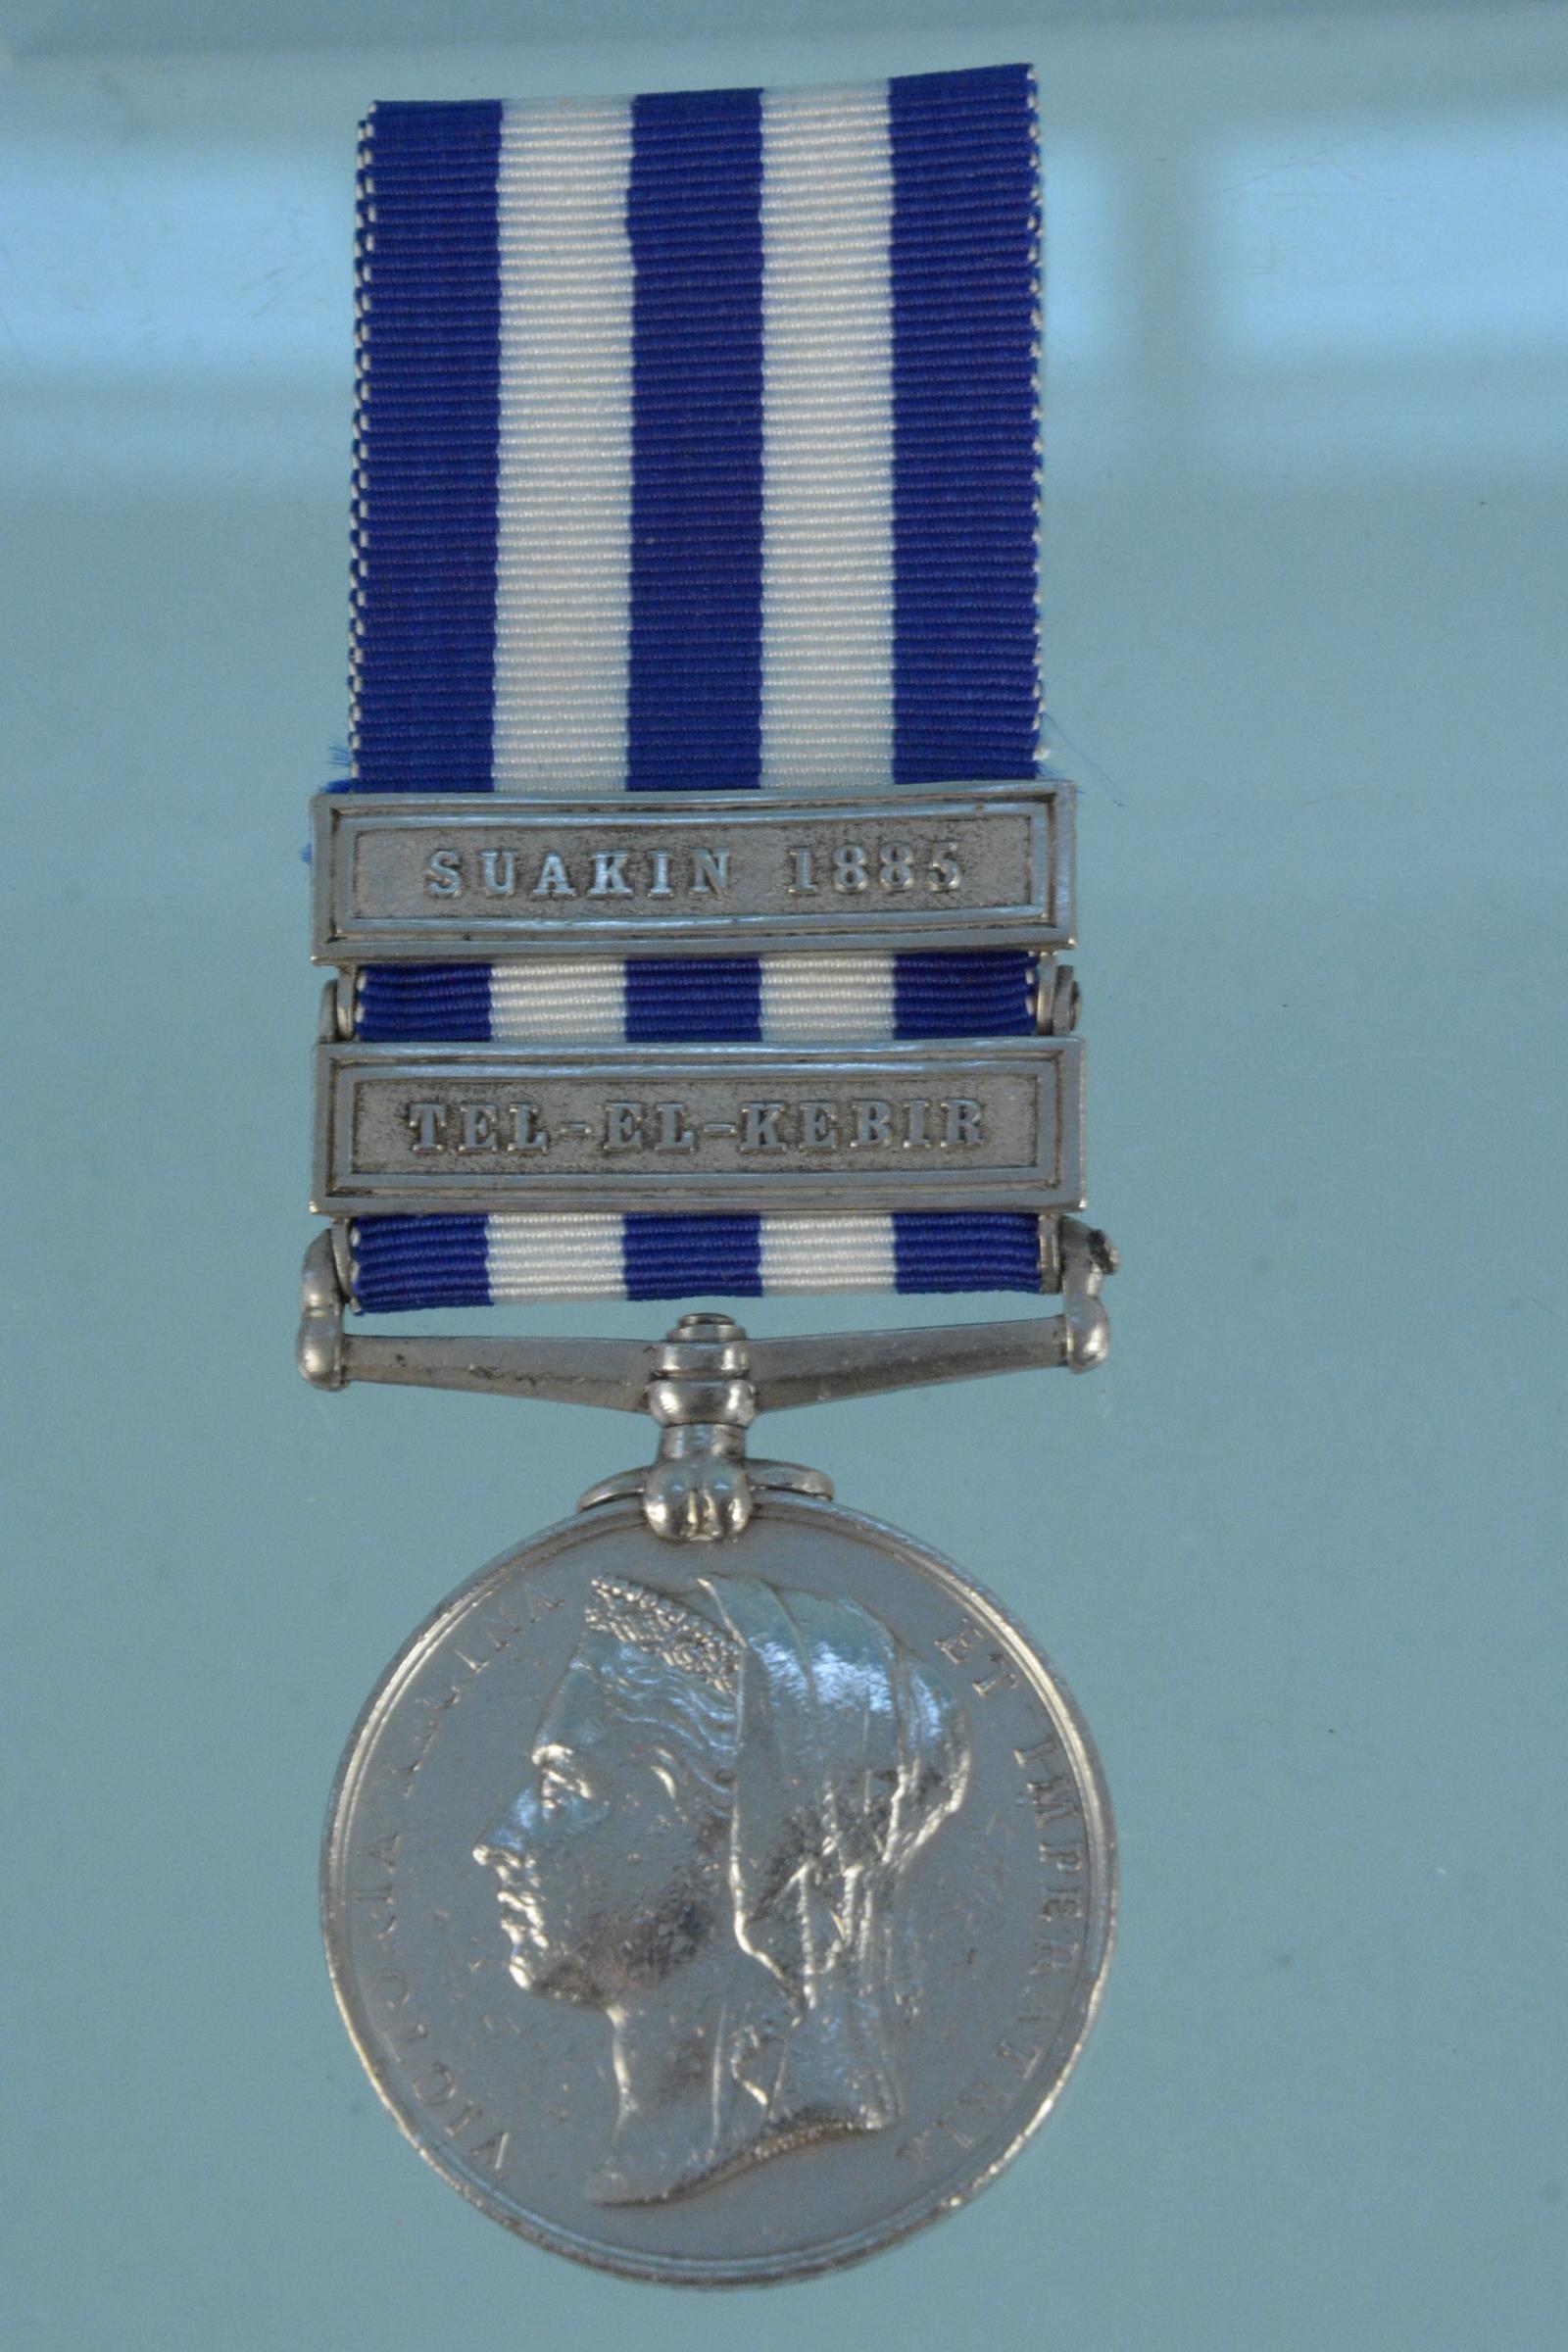 An Egypt medal 1882-89 with Suakin 1885 and Tel-El-Kebir clasps to 3204 Cpl C.E.Melville A.H.C.